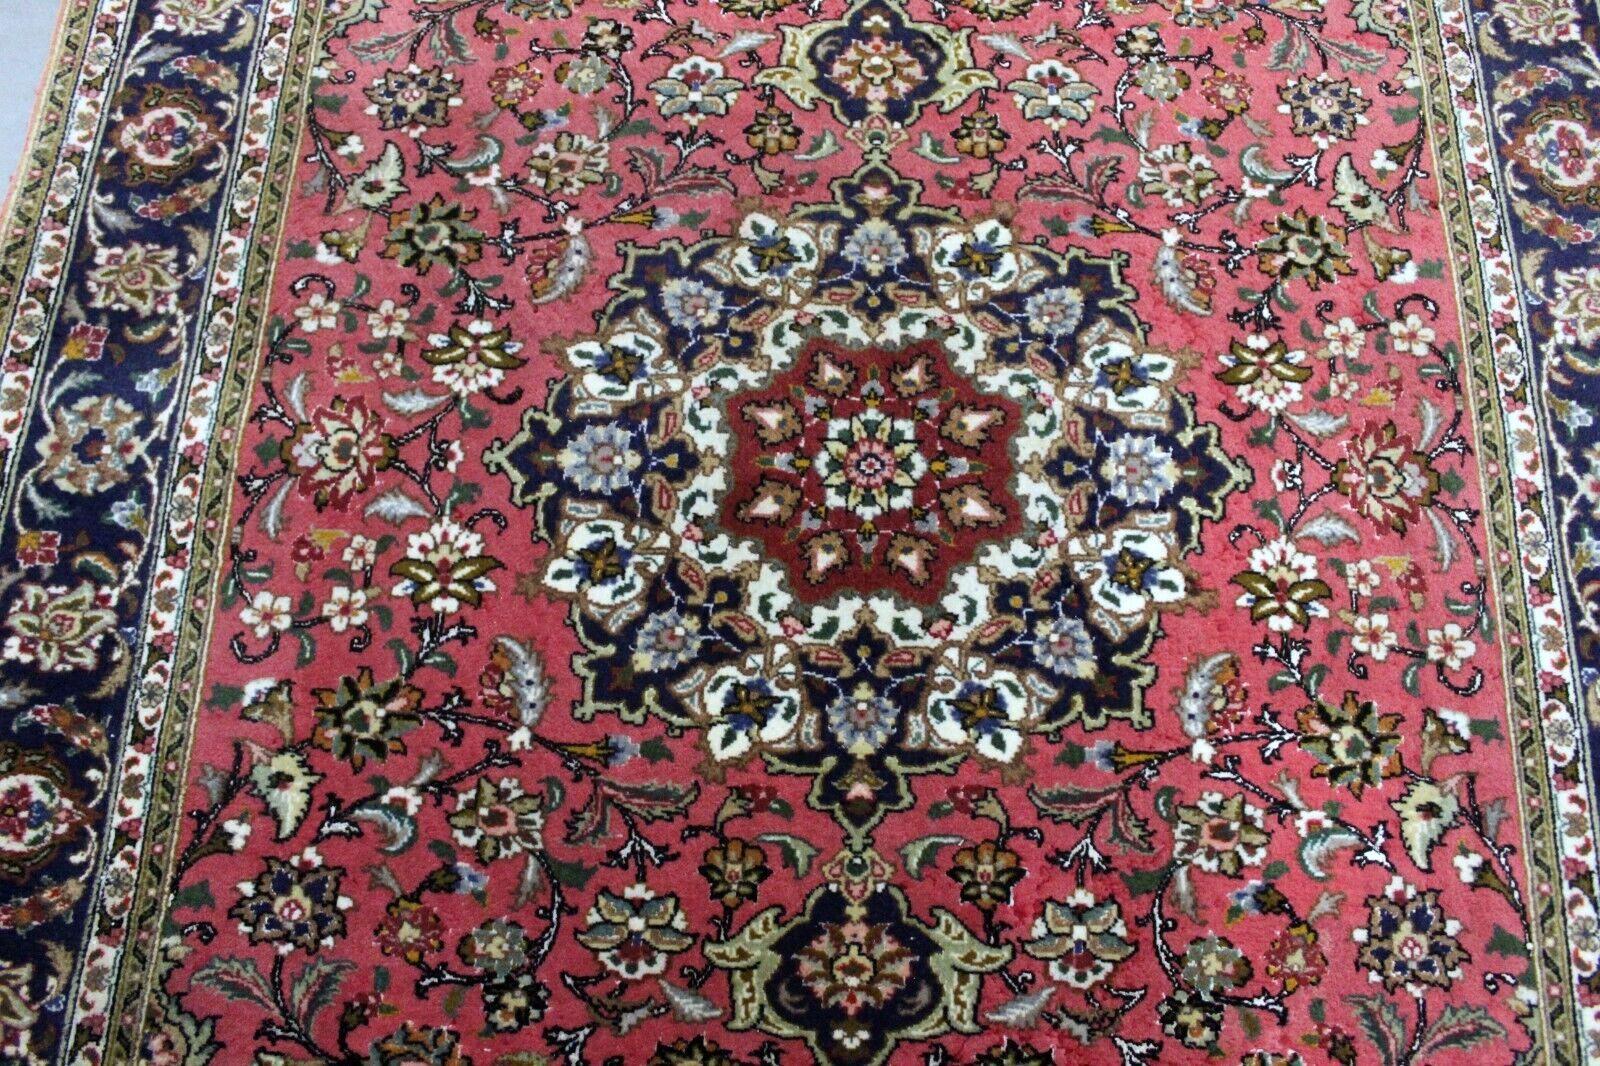 Hand-Knotted Handmade Vintage Persian Style Tabriz Rug With Silk 3.6' x 4.9', 1970s - 1K49 For Sale